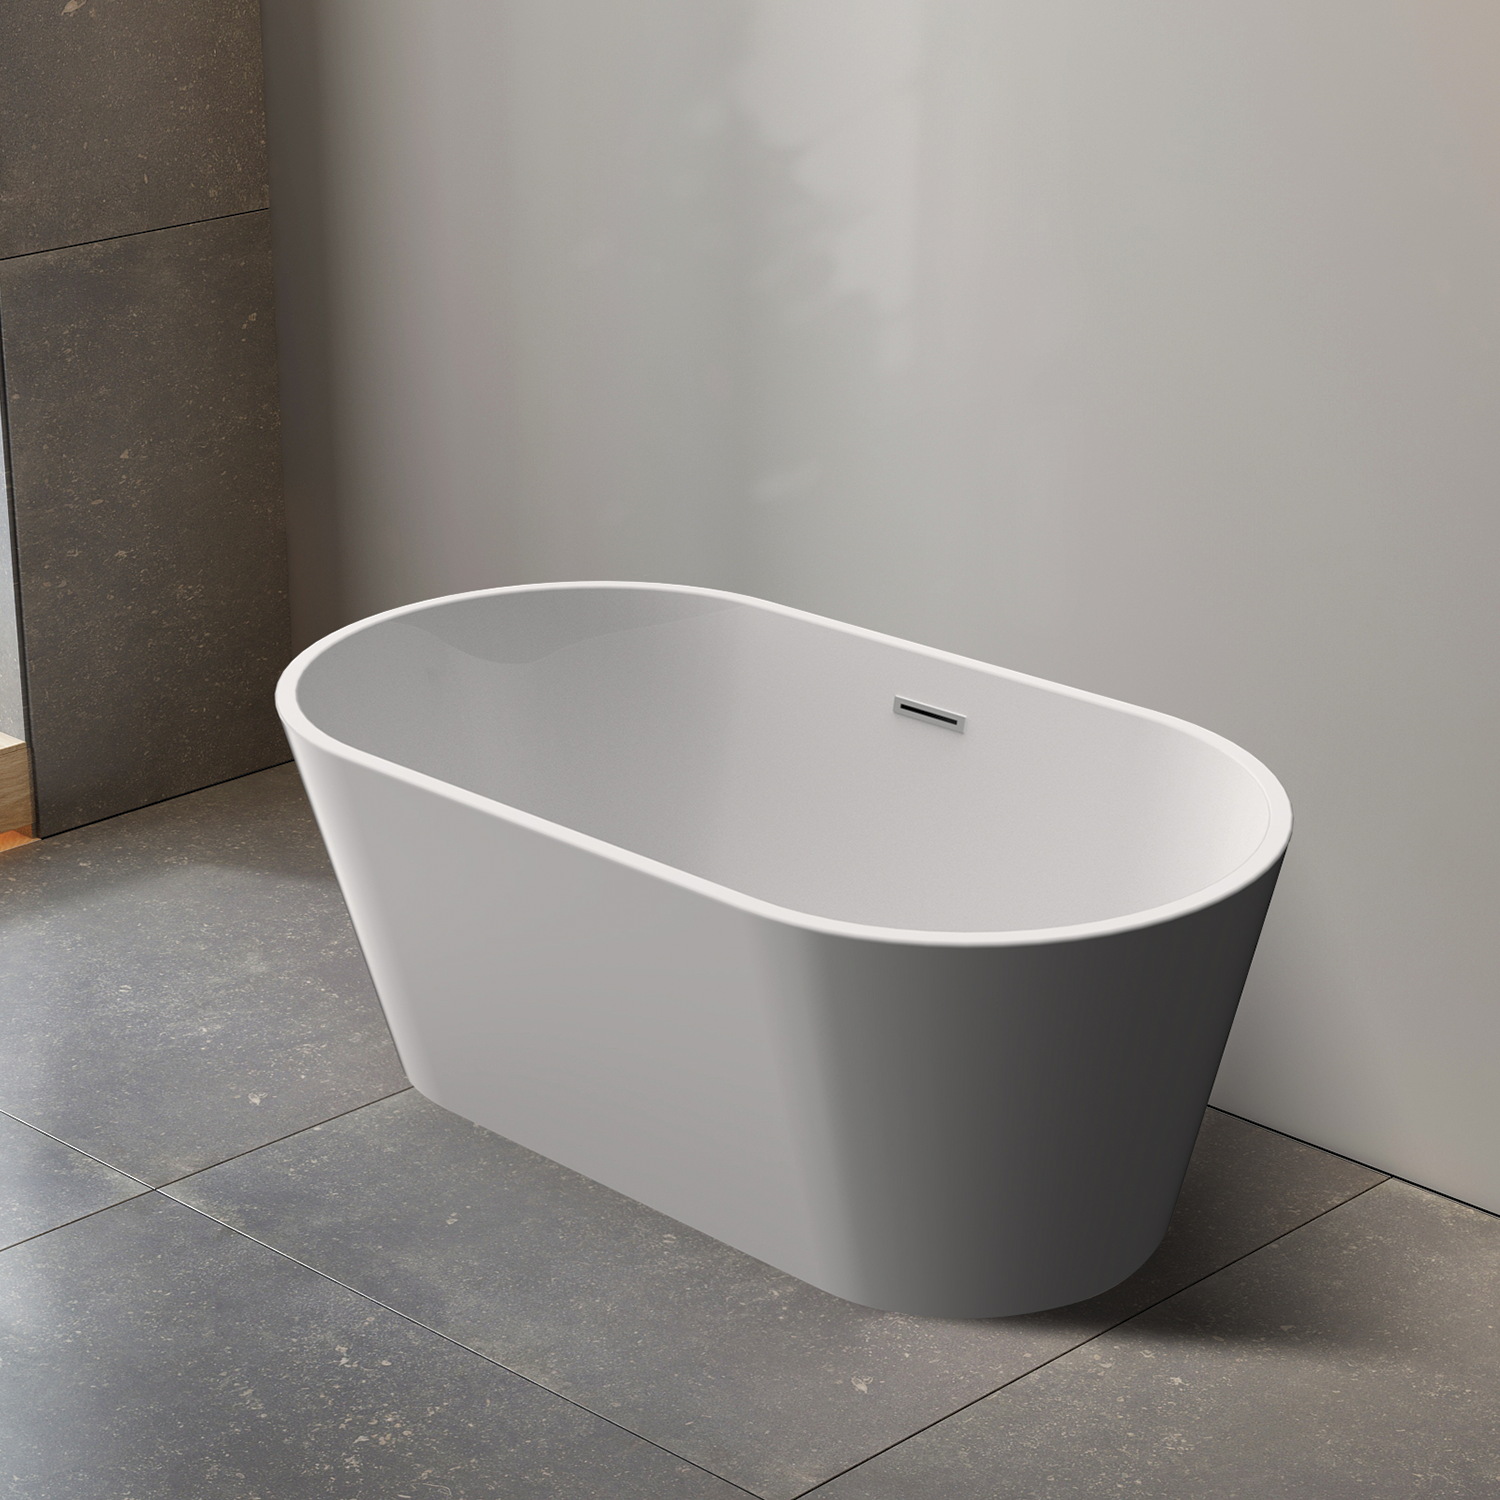 DAX Oval Freestanding Acrylic Bathtub - Glossy White Finished -55 inches (BT-11140)